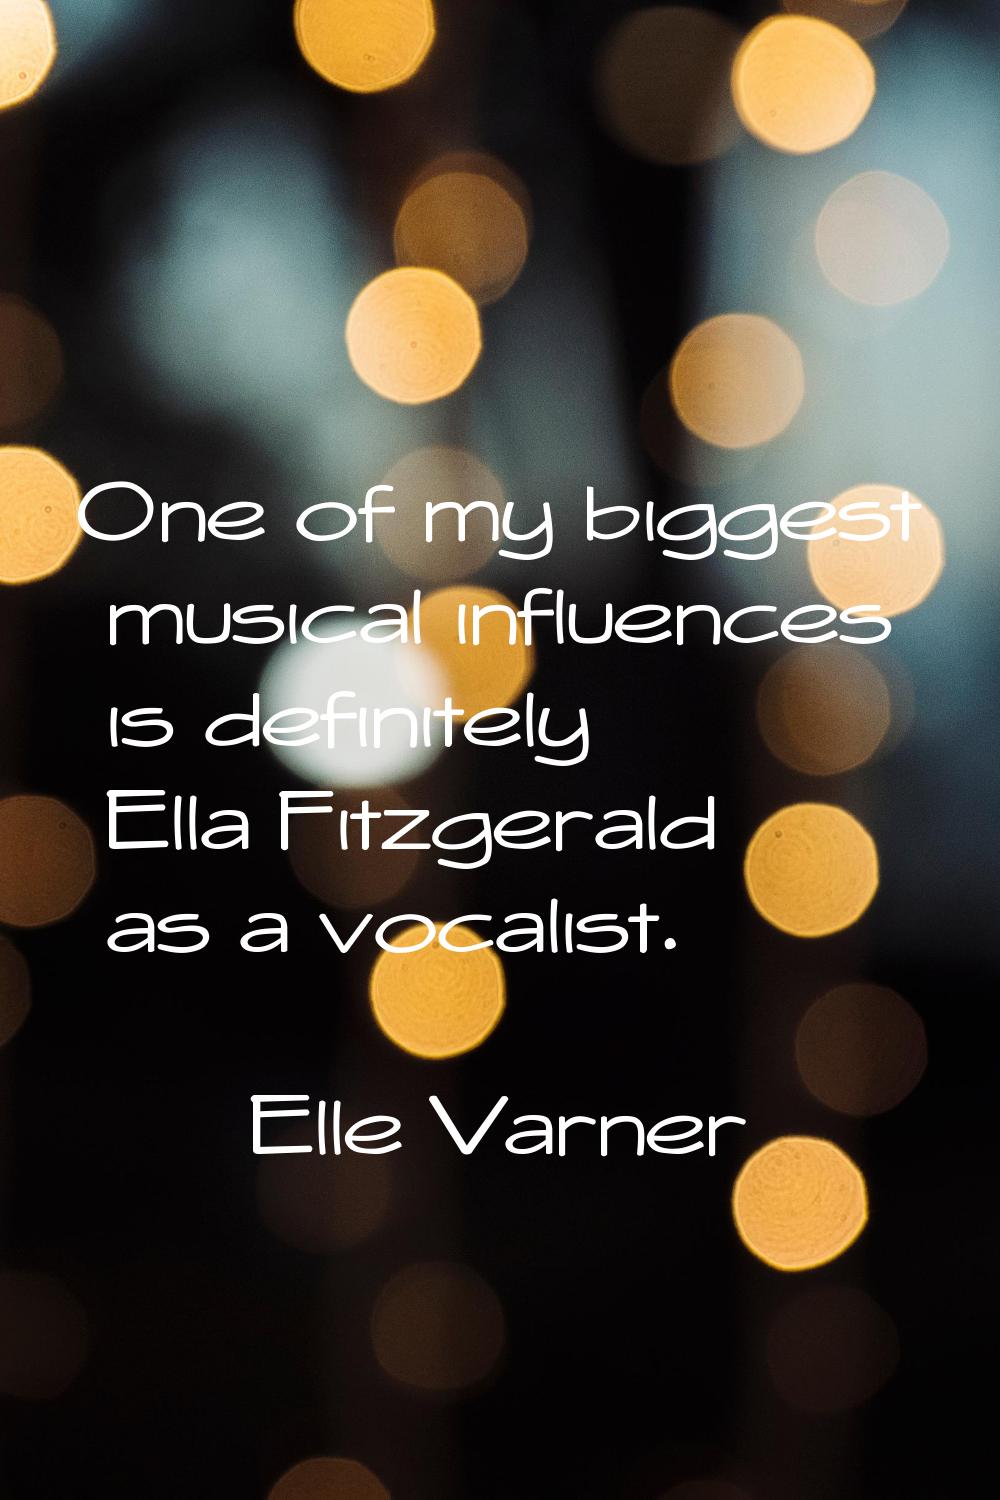 One of my biggest musical influences is definitely Ella Fitzgerald as a vocalist.